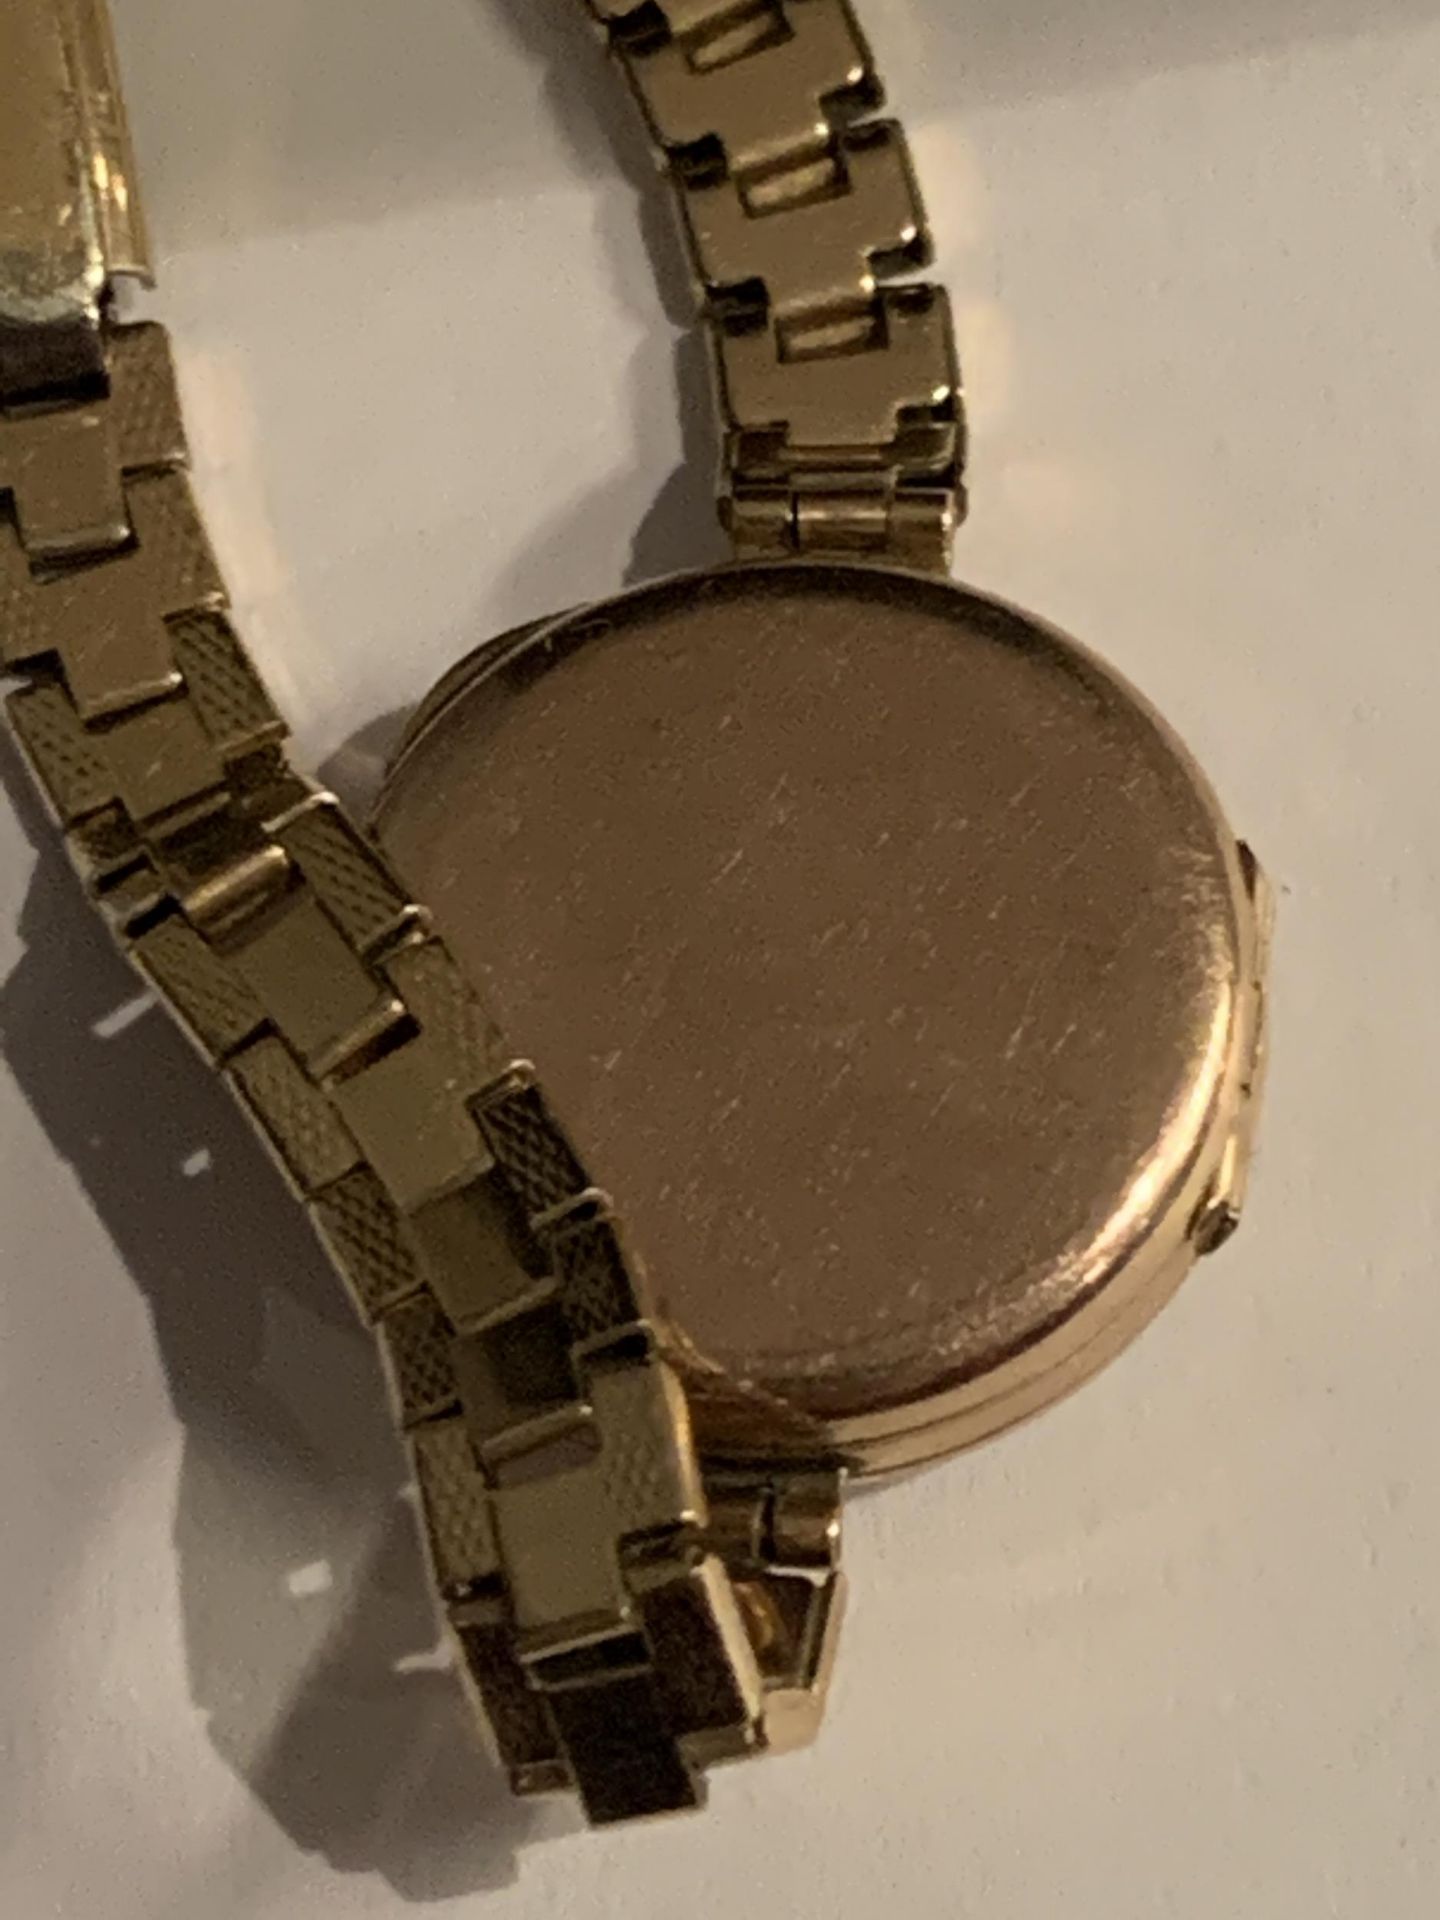 A VINTAGE WRIST WATCH WITH 9 CARAT GOLD CASE AND GOLD PLATED STRAP - Image 3 of 4